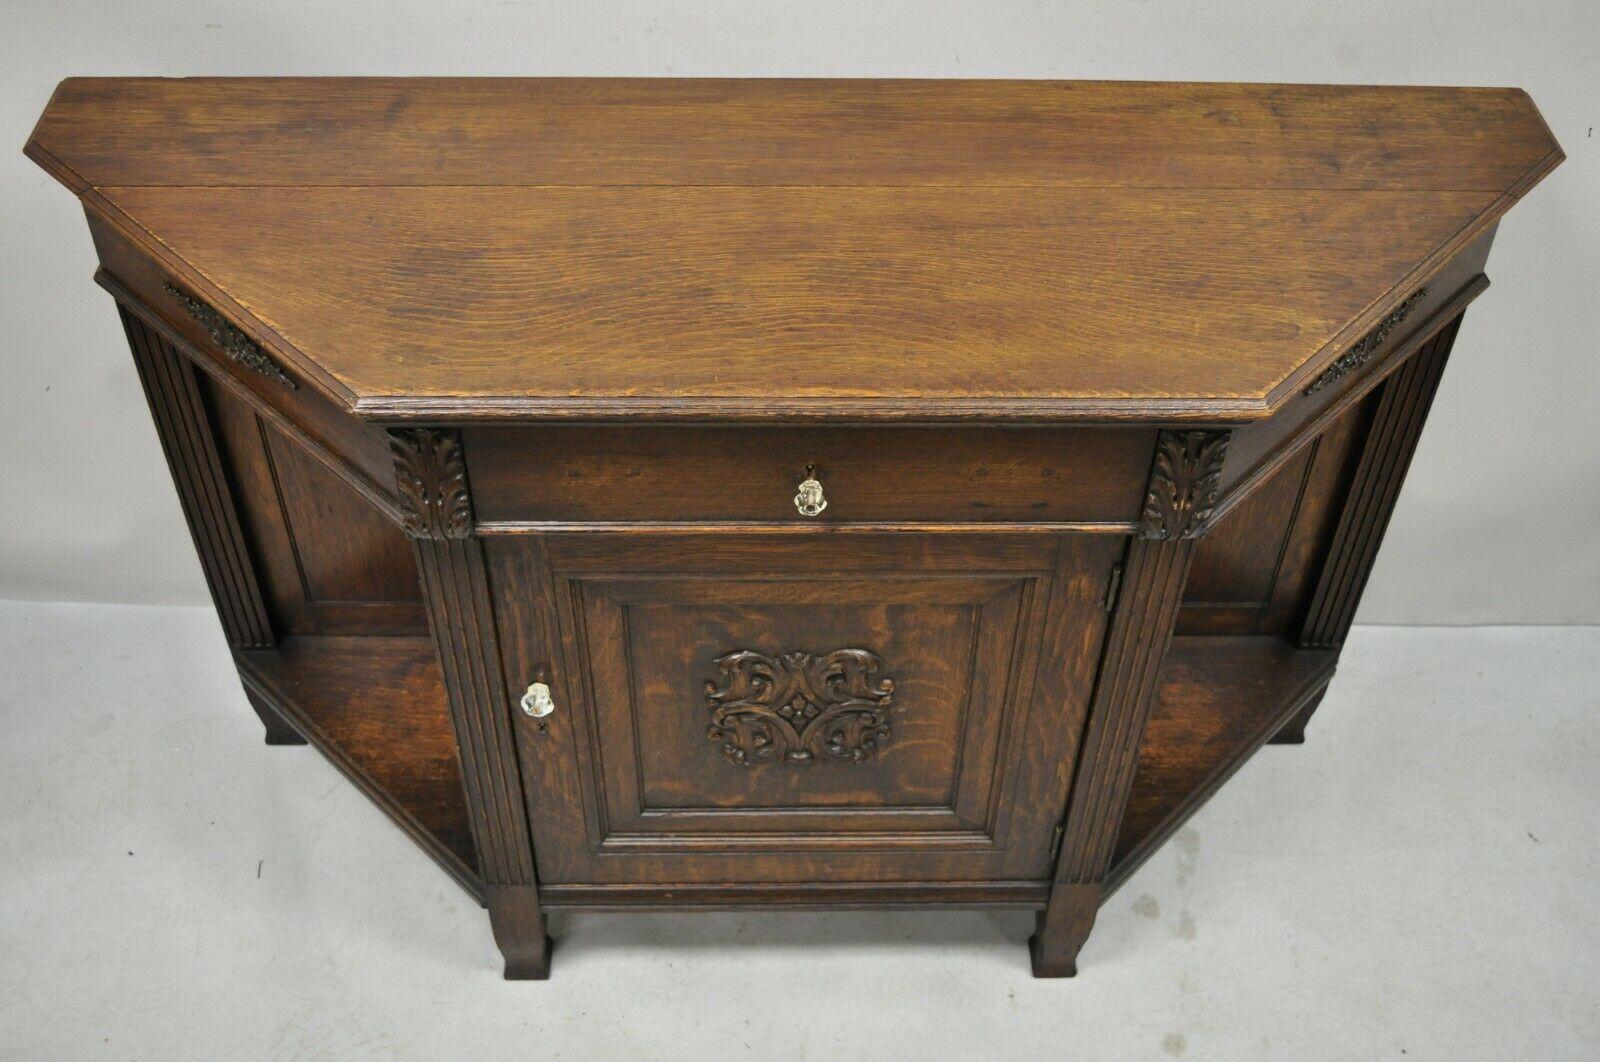 Antique European Renaissance Oak Wood Buffet Console Cabinet. Item features beautiful wood grain, nicely carved details,1 swing door, no key, but unlocked, 1 drawer, very nice vintage item. Circa Early 1900s. Measurements: 35